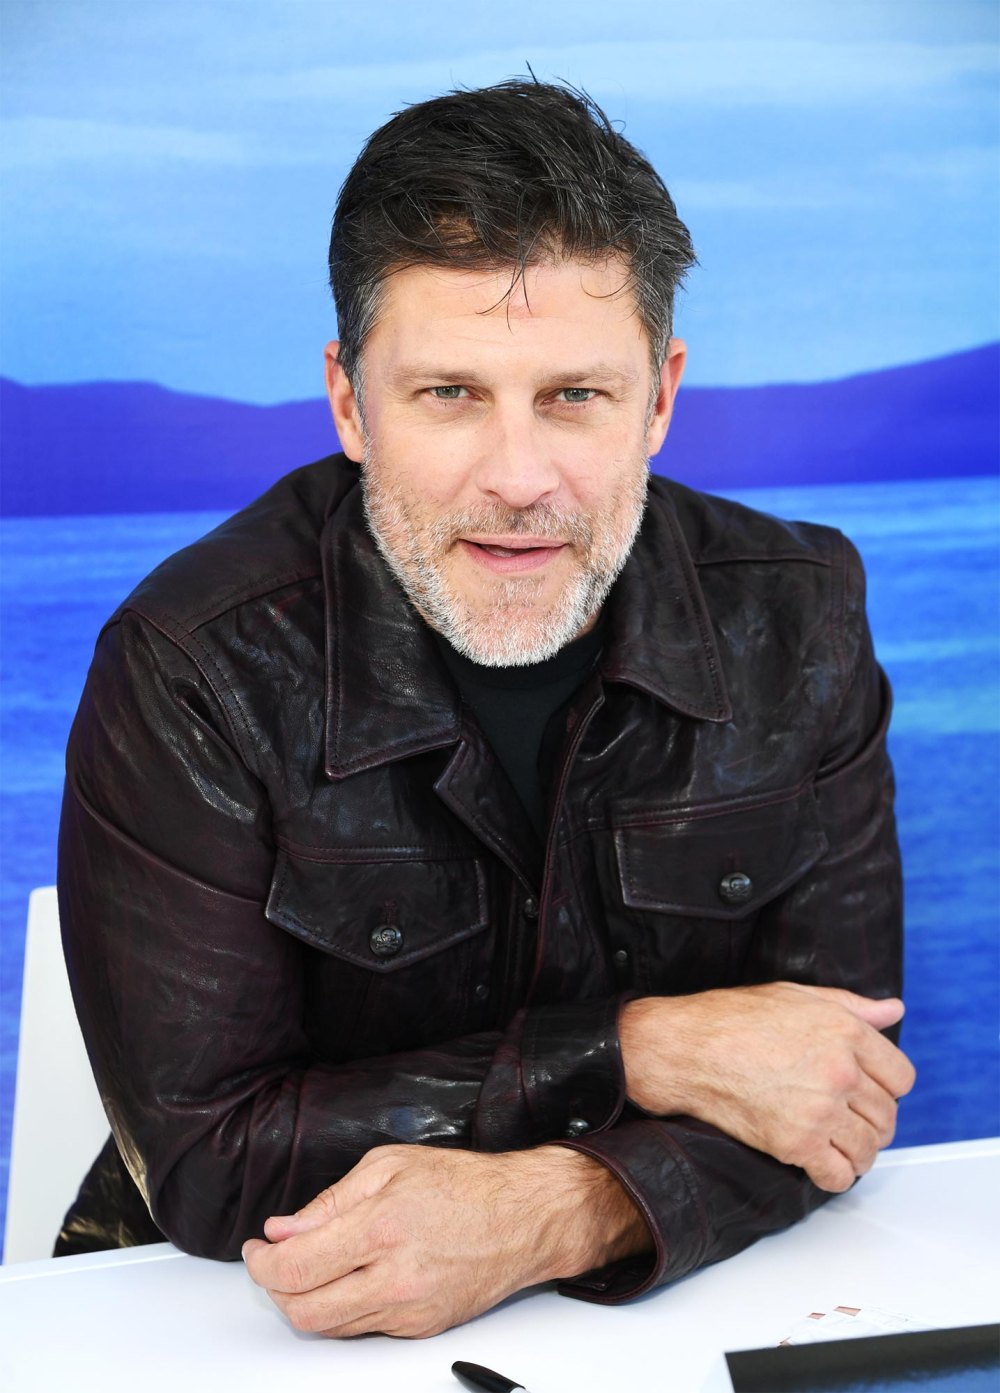 Days of Our Lives Star Greg Vaughan Hospitalized With Severe Altitude Sickness